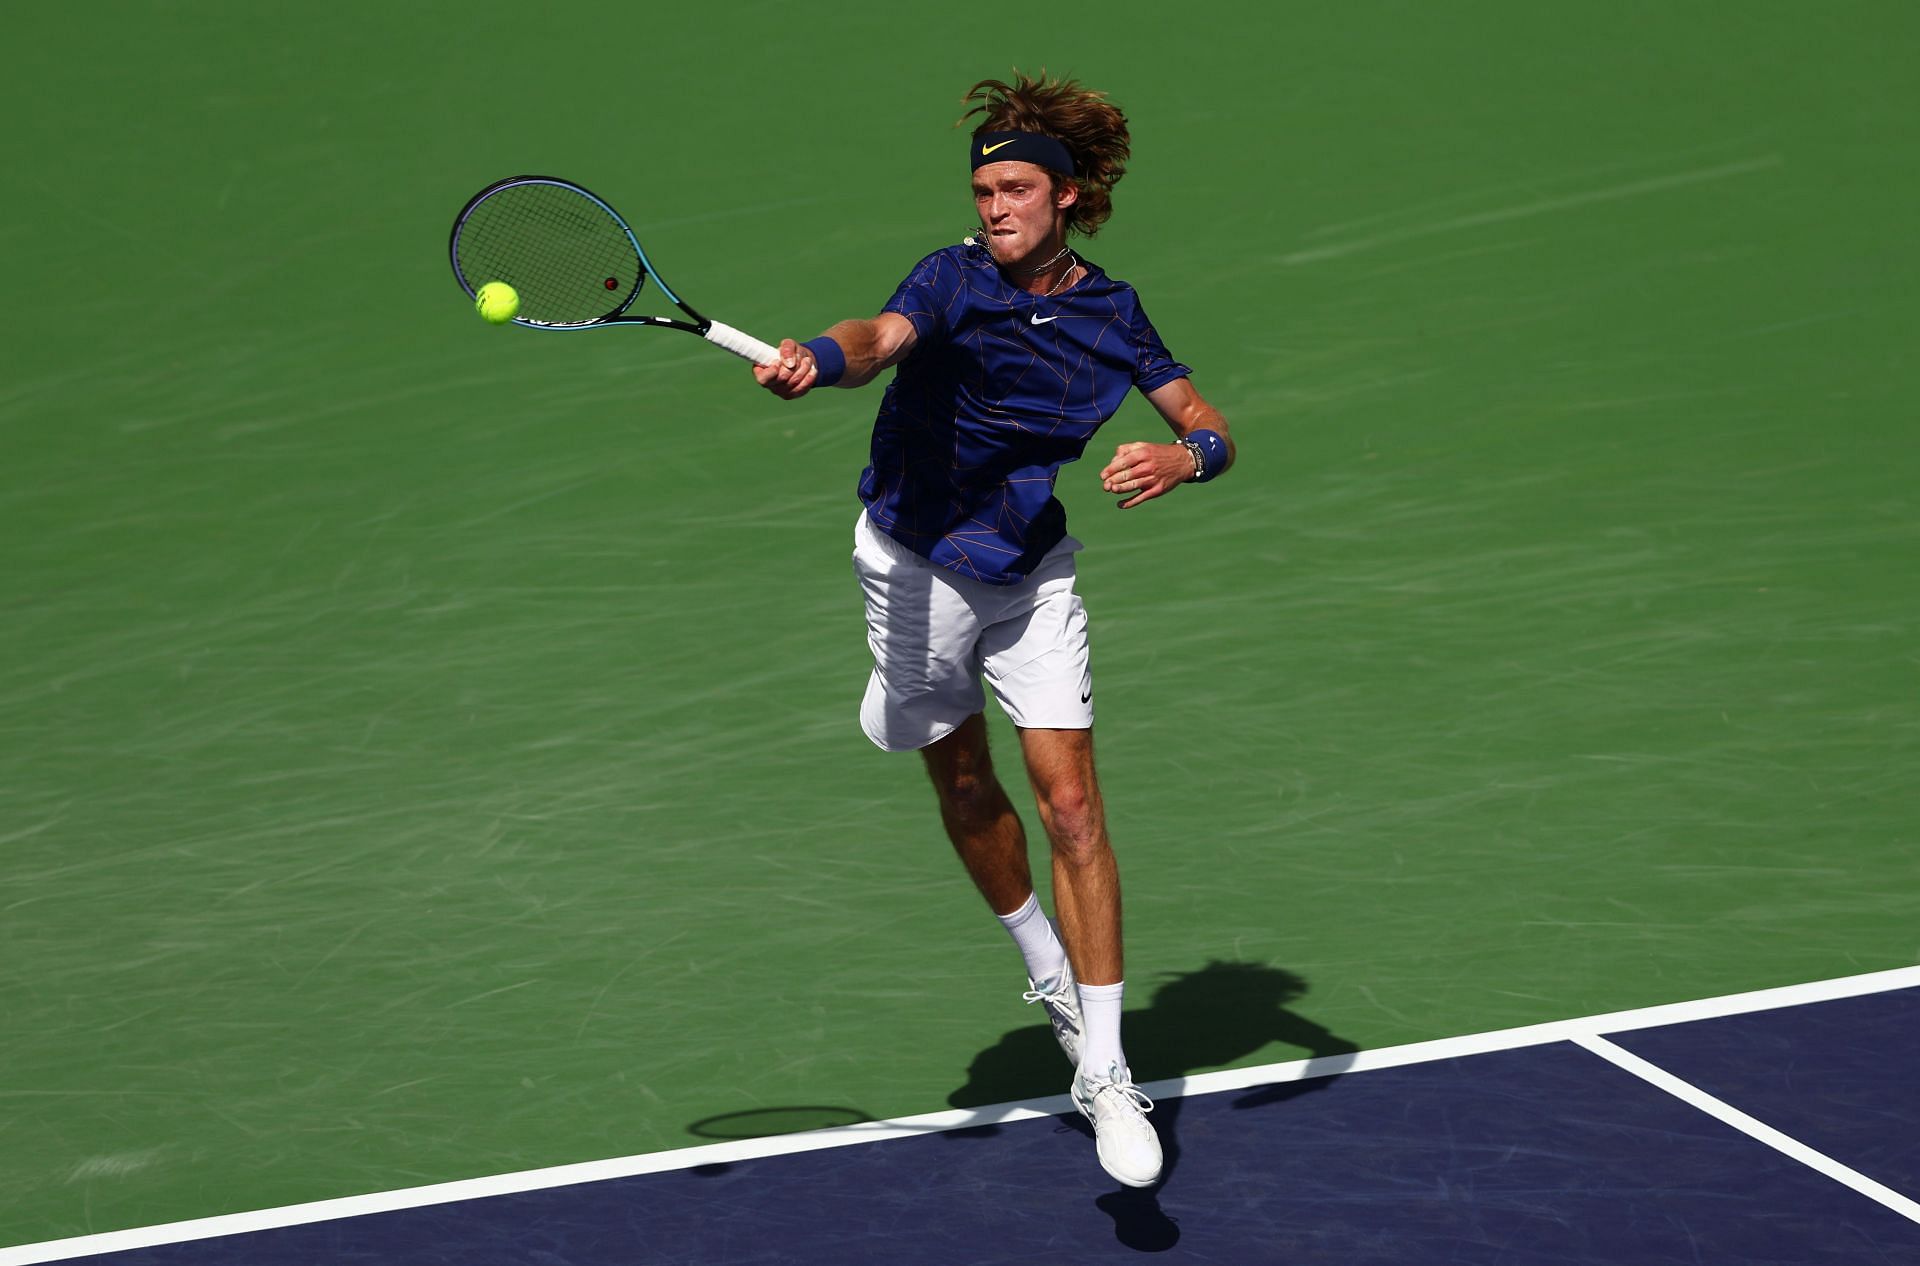 Andrey Rublev in action at the 2002 BNP Paribas Open.